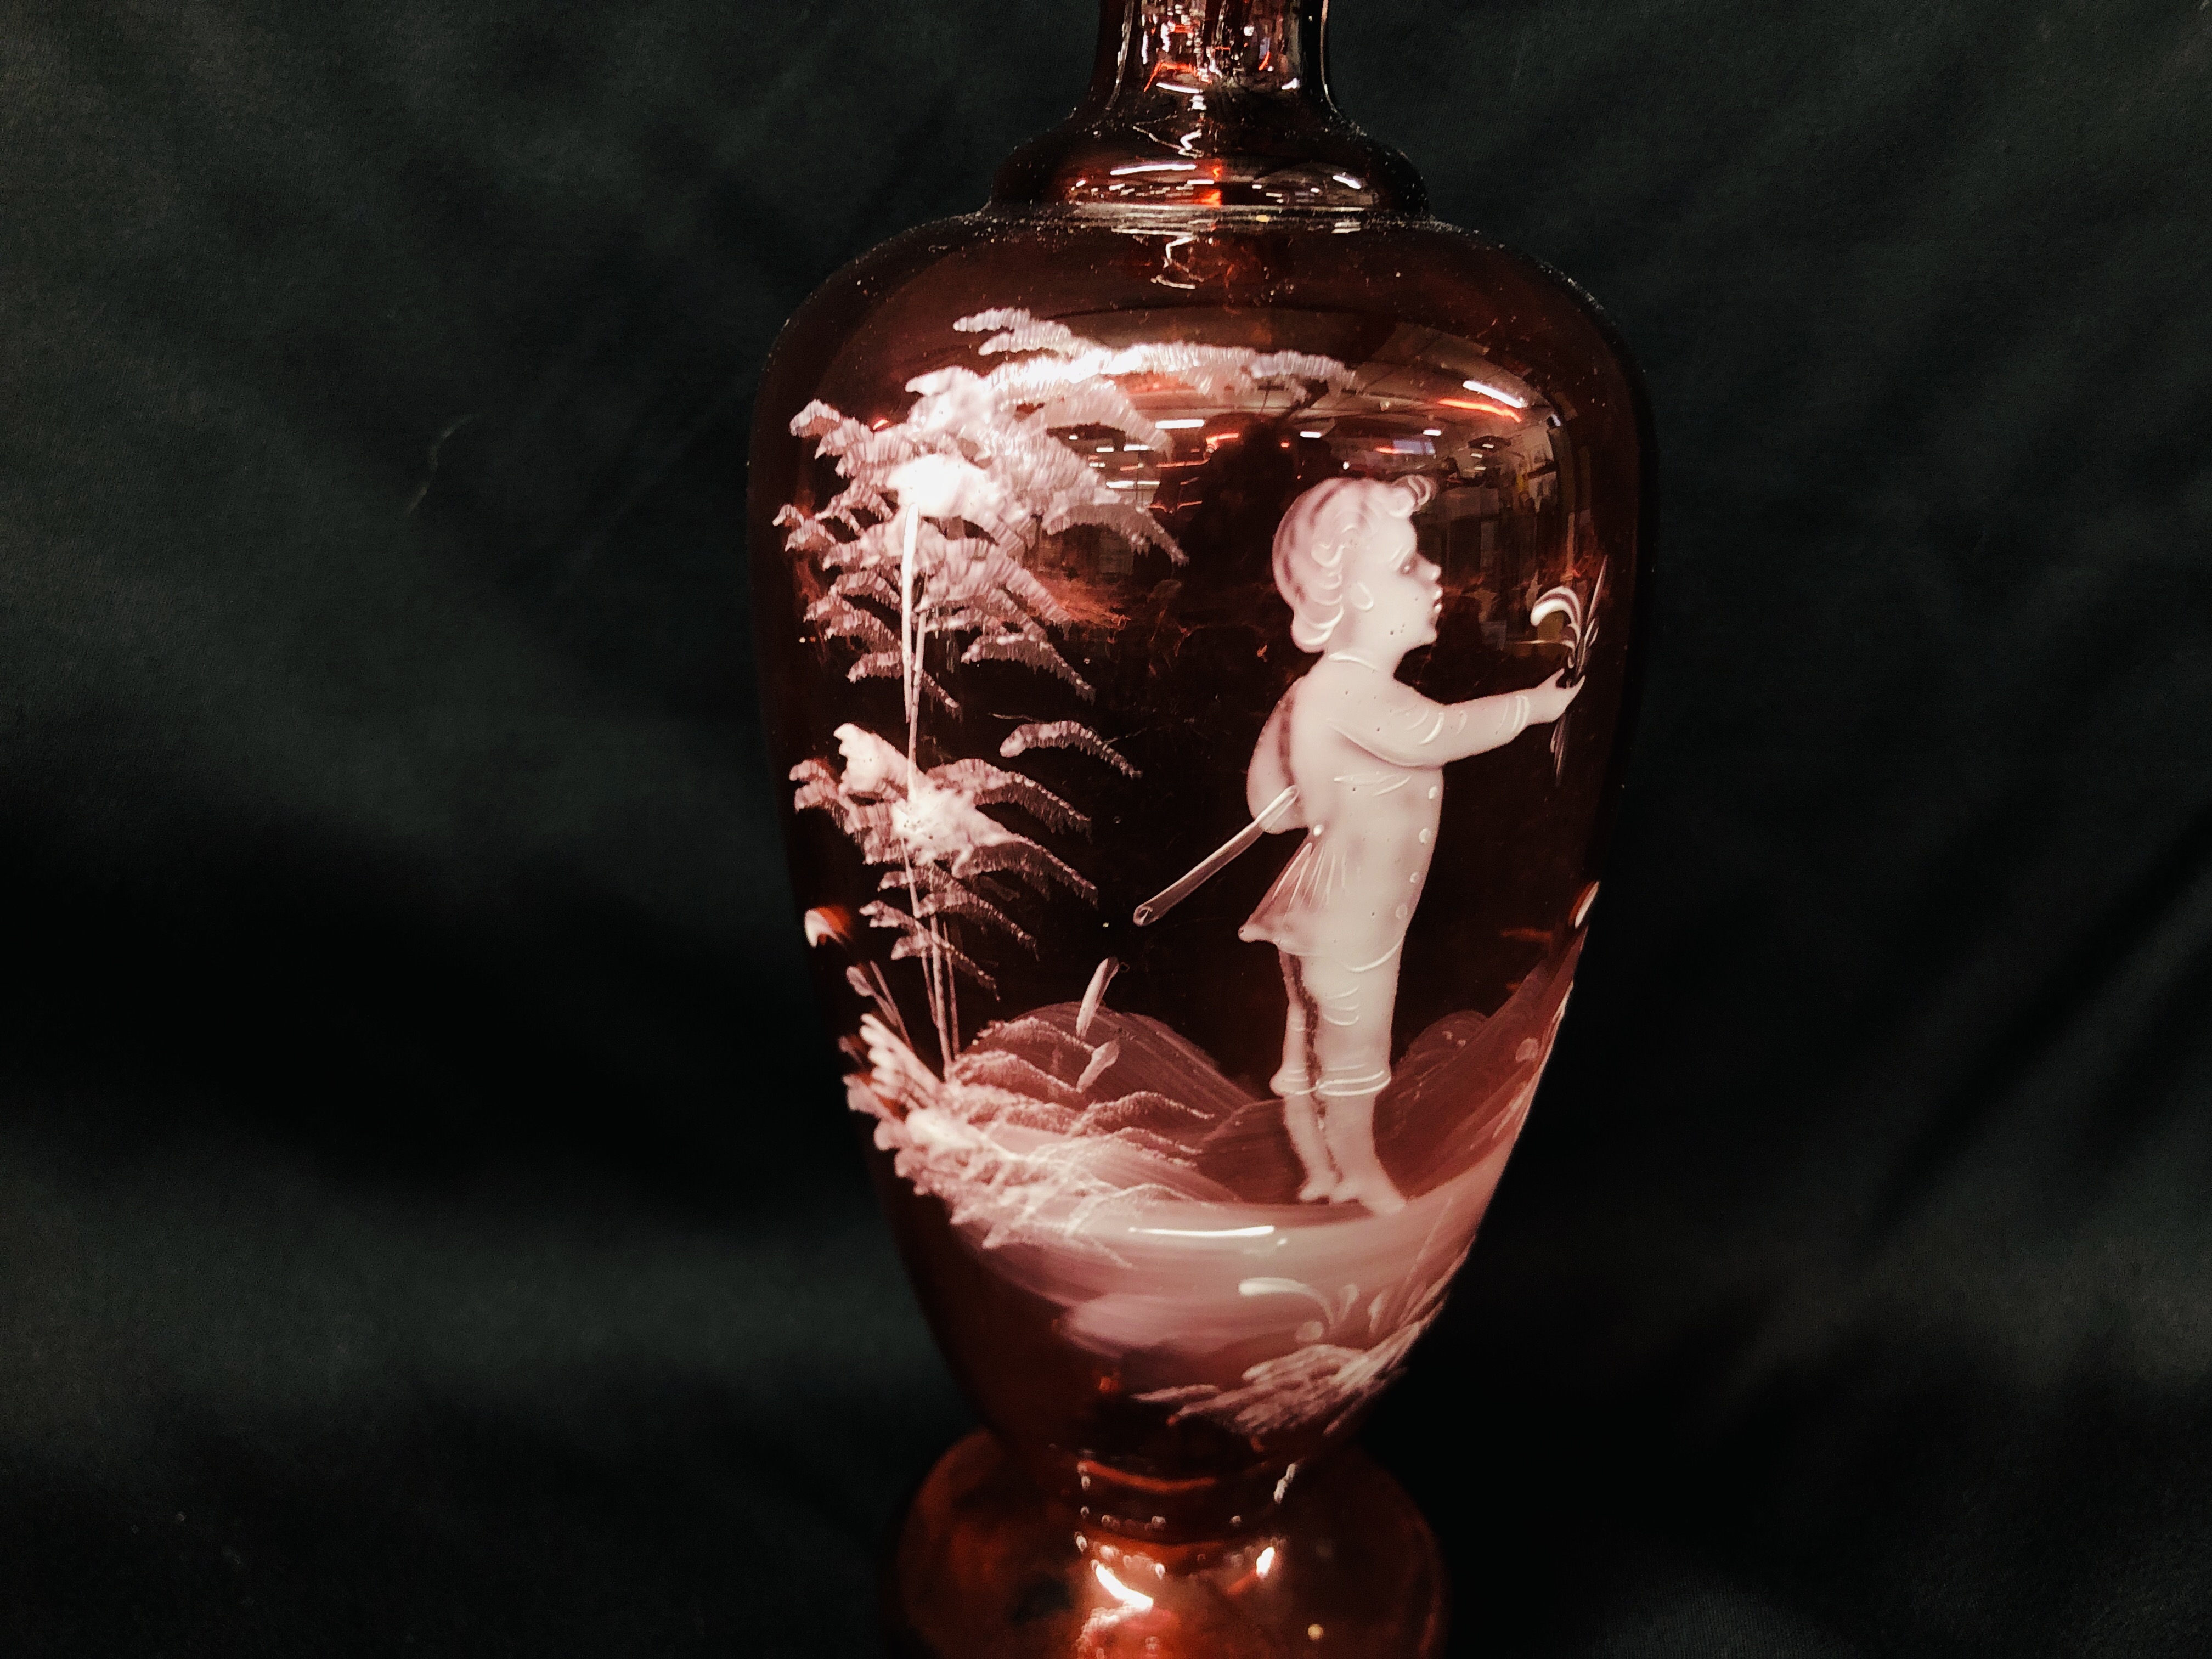 MARY GREGORY CRANBERRY VASE, VINTAGE CLEAR GLASS DECANTER WITH ETCHED FERN AND BIRD DESIGN. - Image 3 of 10